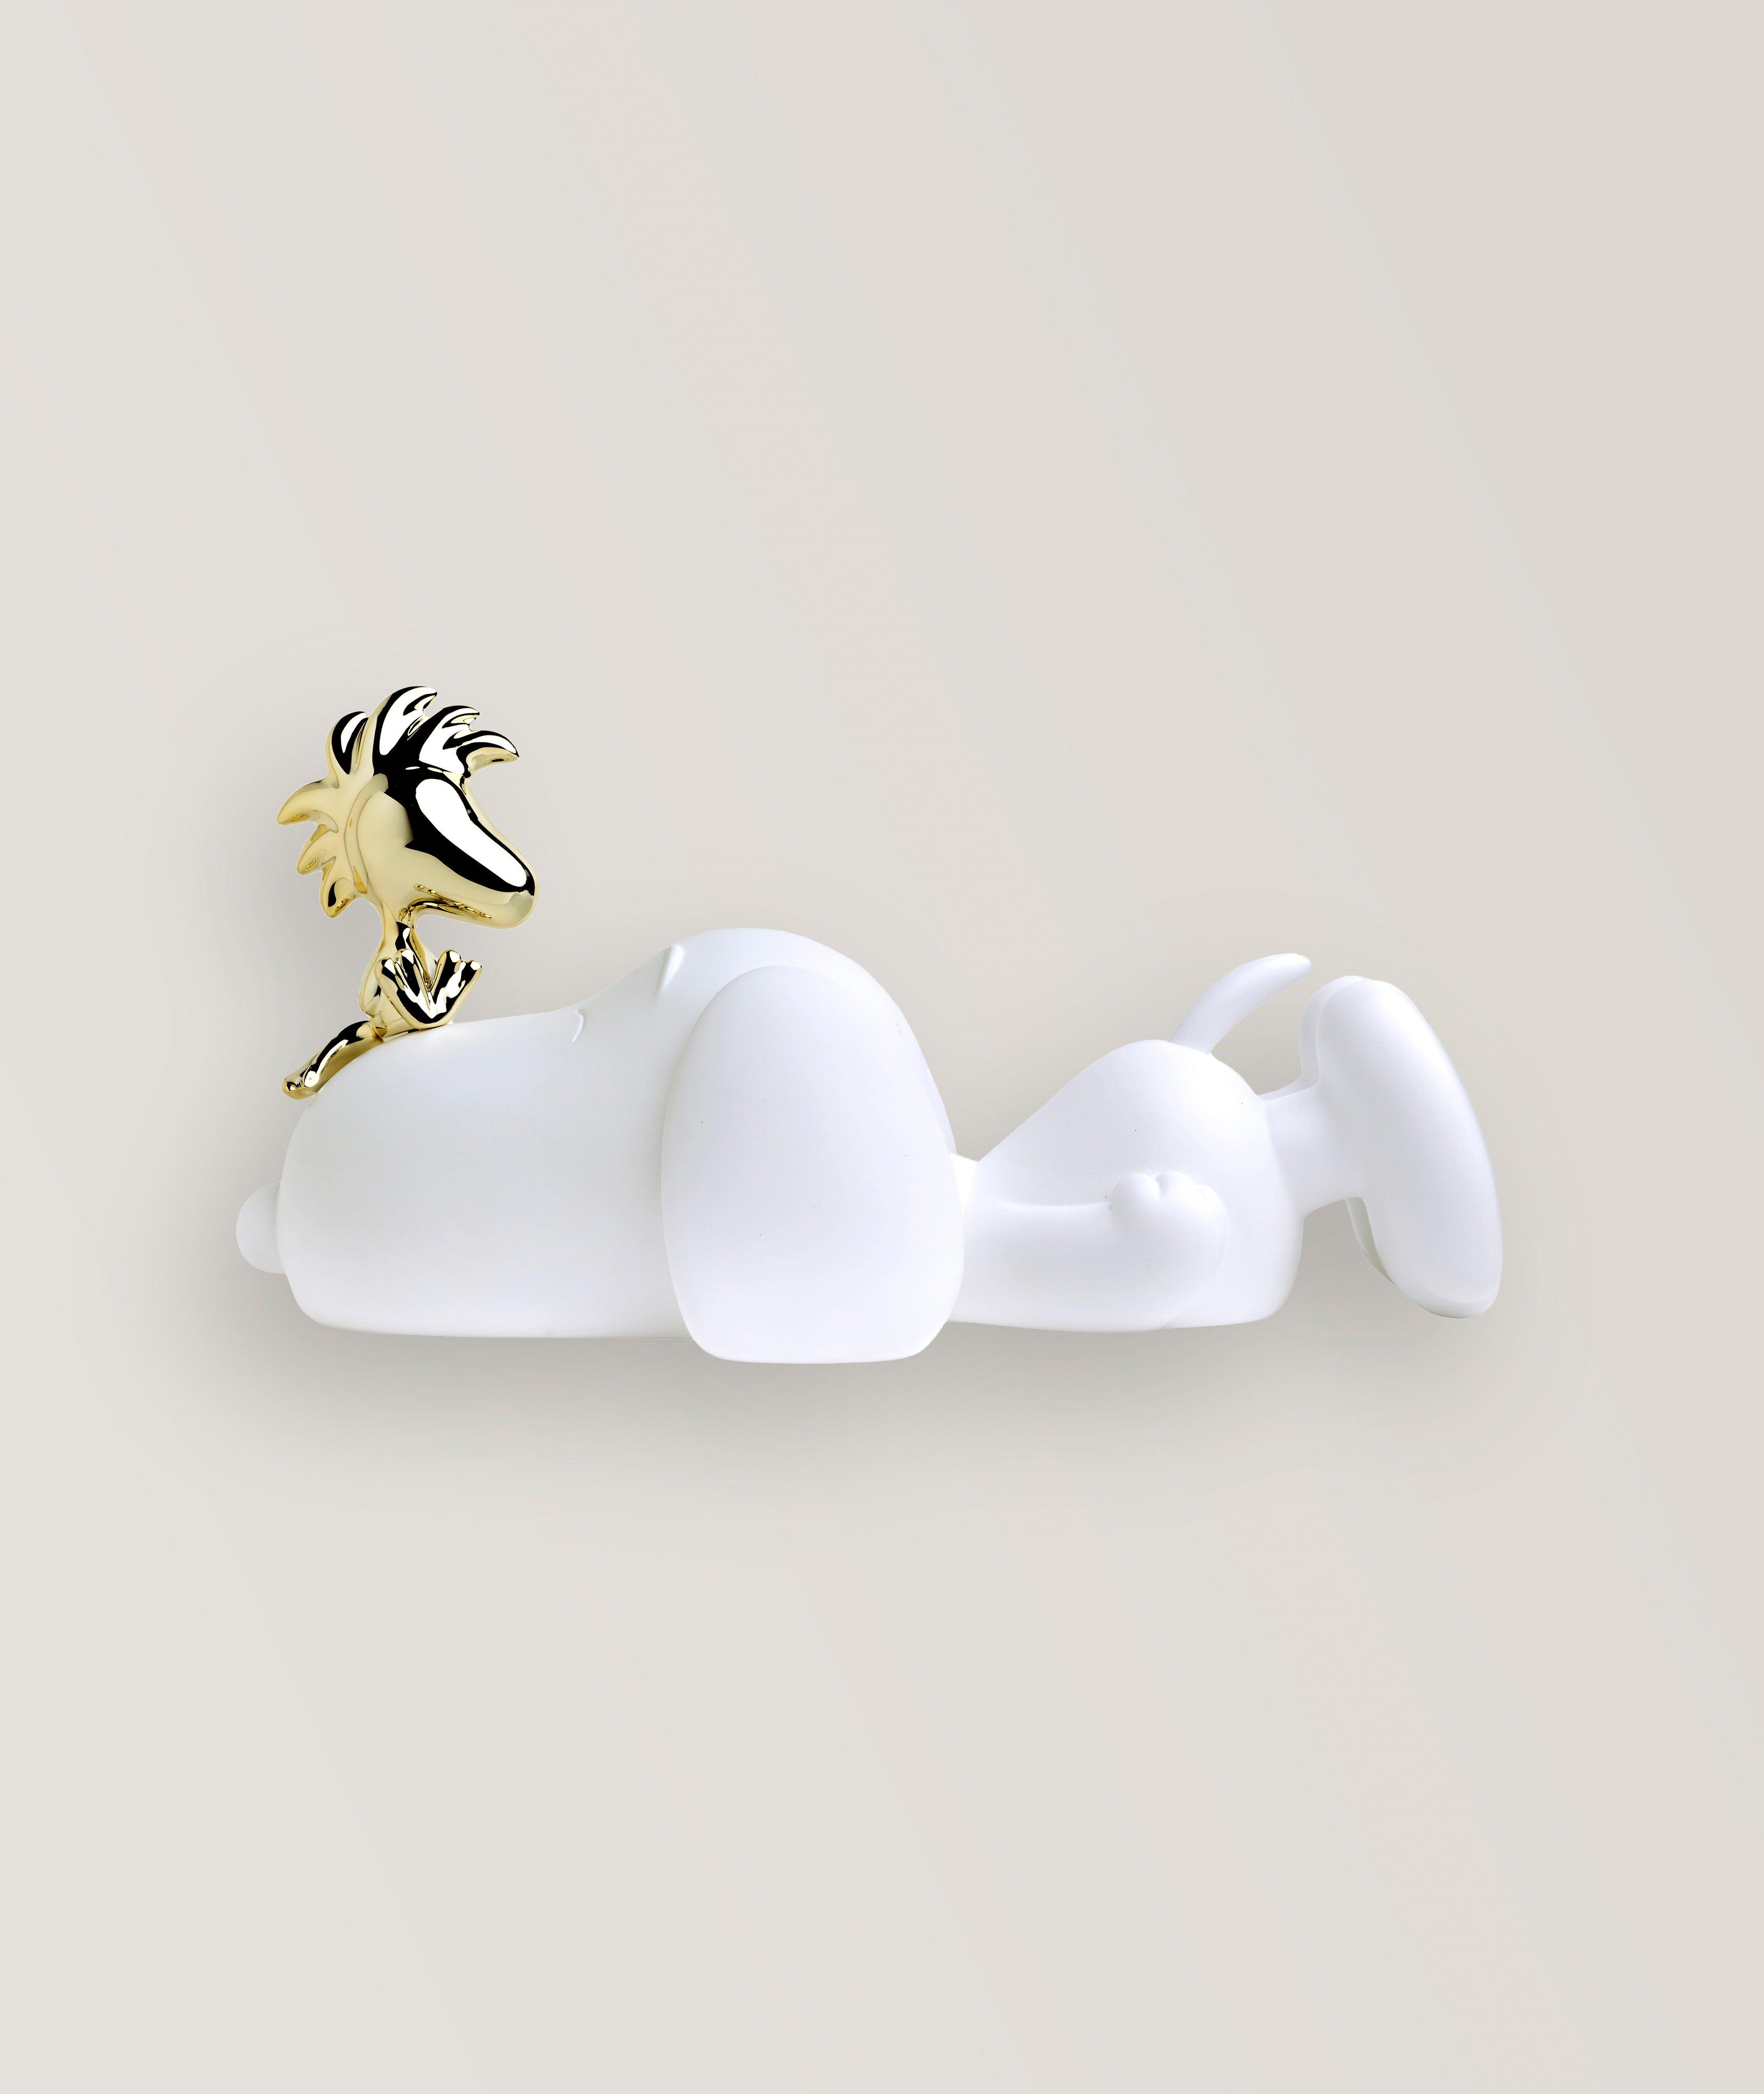 Peanuts Collection Snoopy & Woodstock Bicolour Resin Sculpture image 0